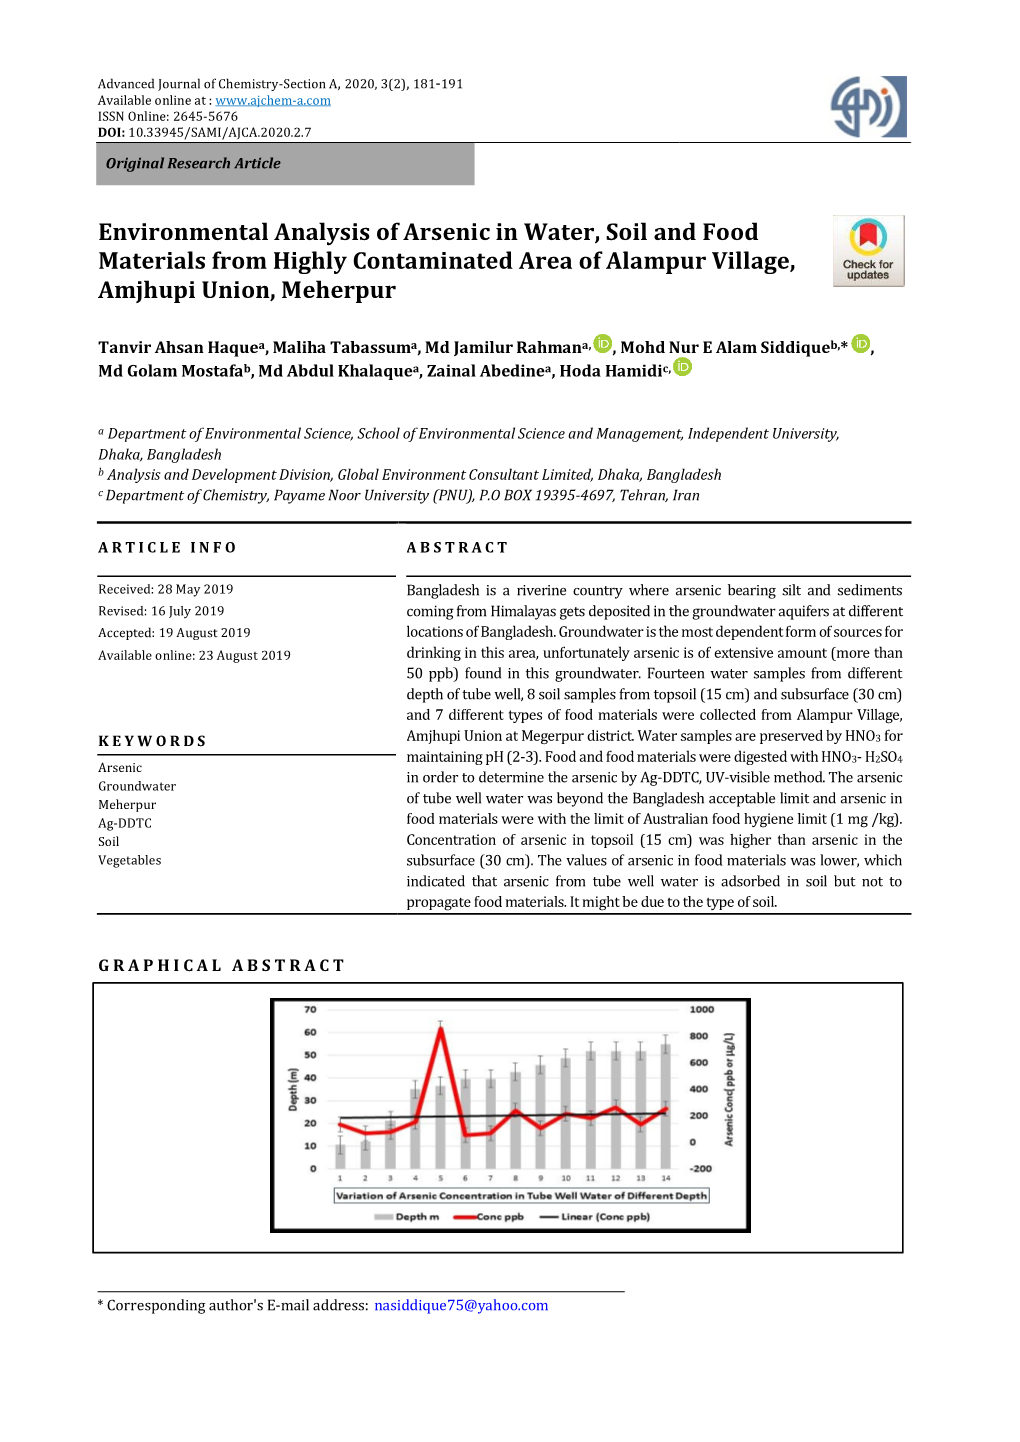 Environmental Analysis of Arsenic in Water, Soil and Food Materials from Highly Contaminated Area of Alampur Village, Amjhupi Union, Meherpur